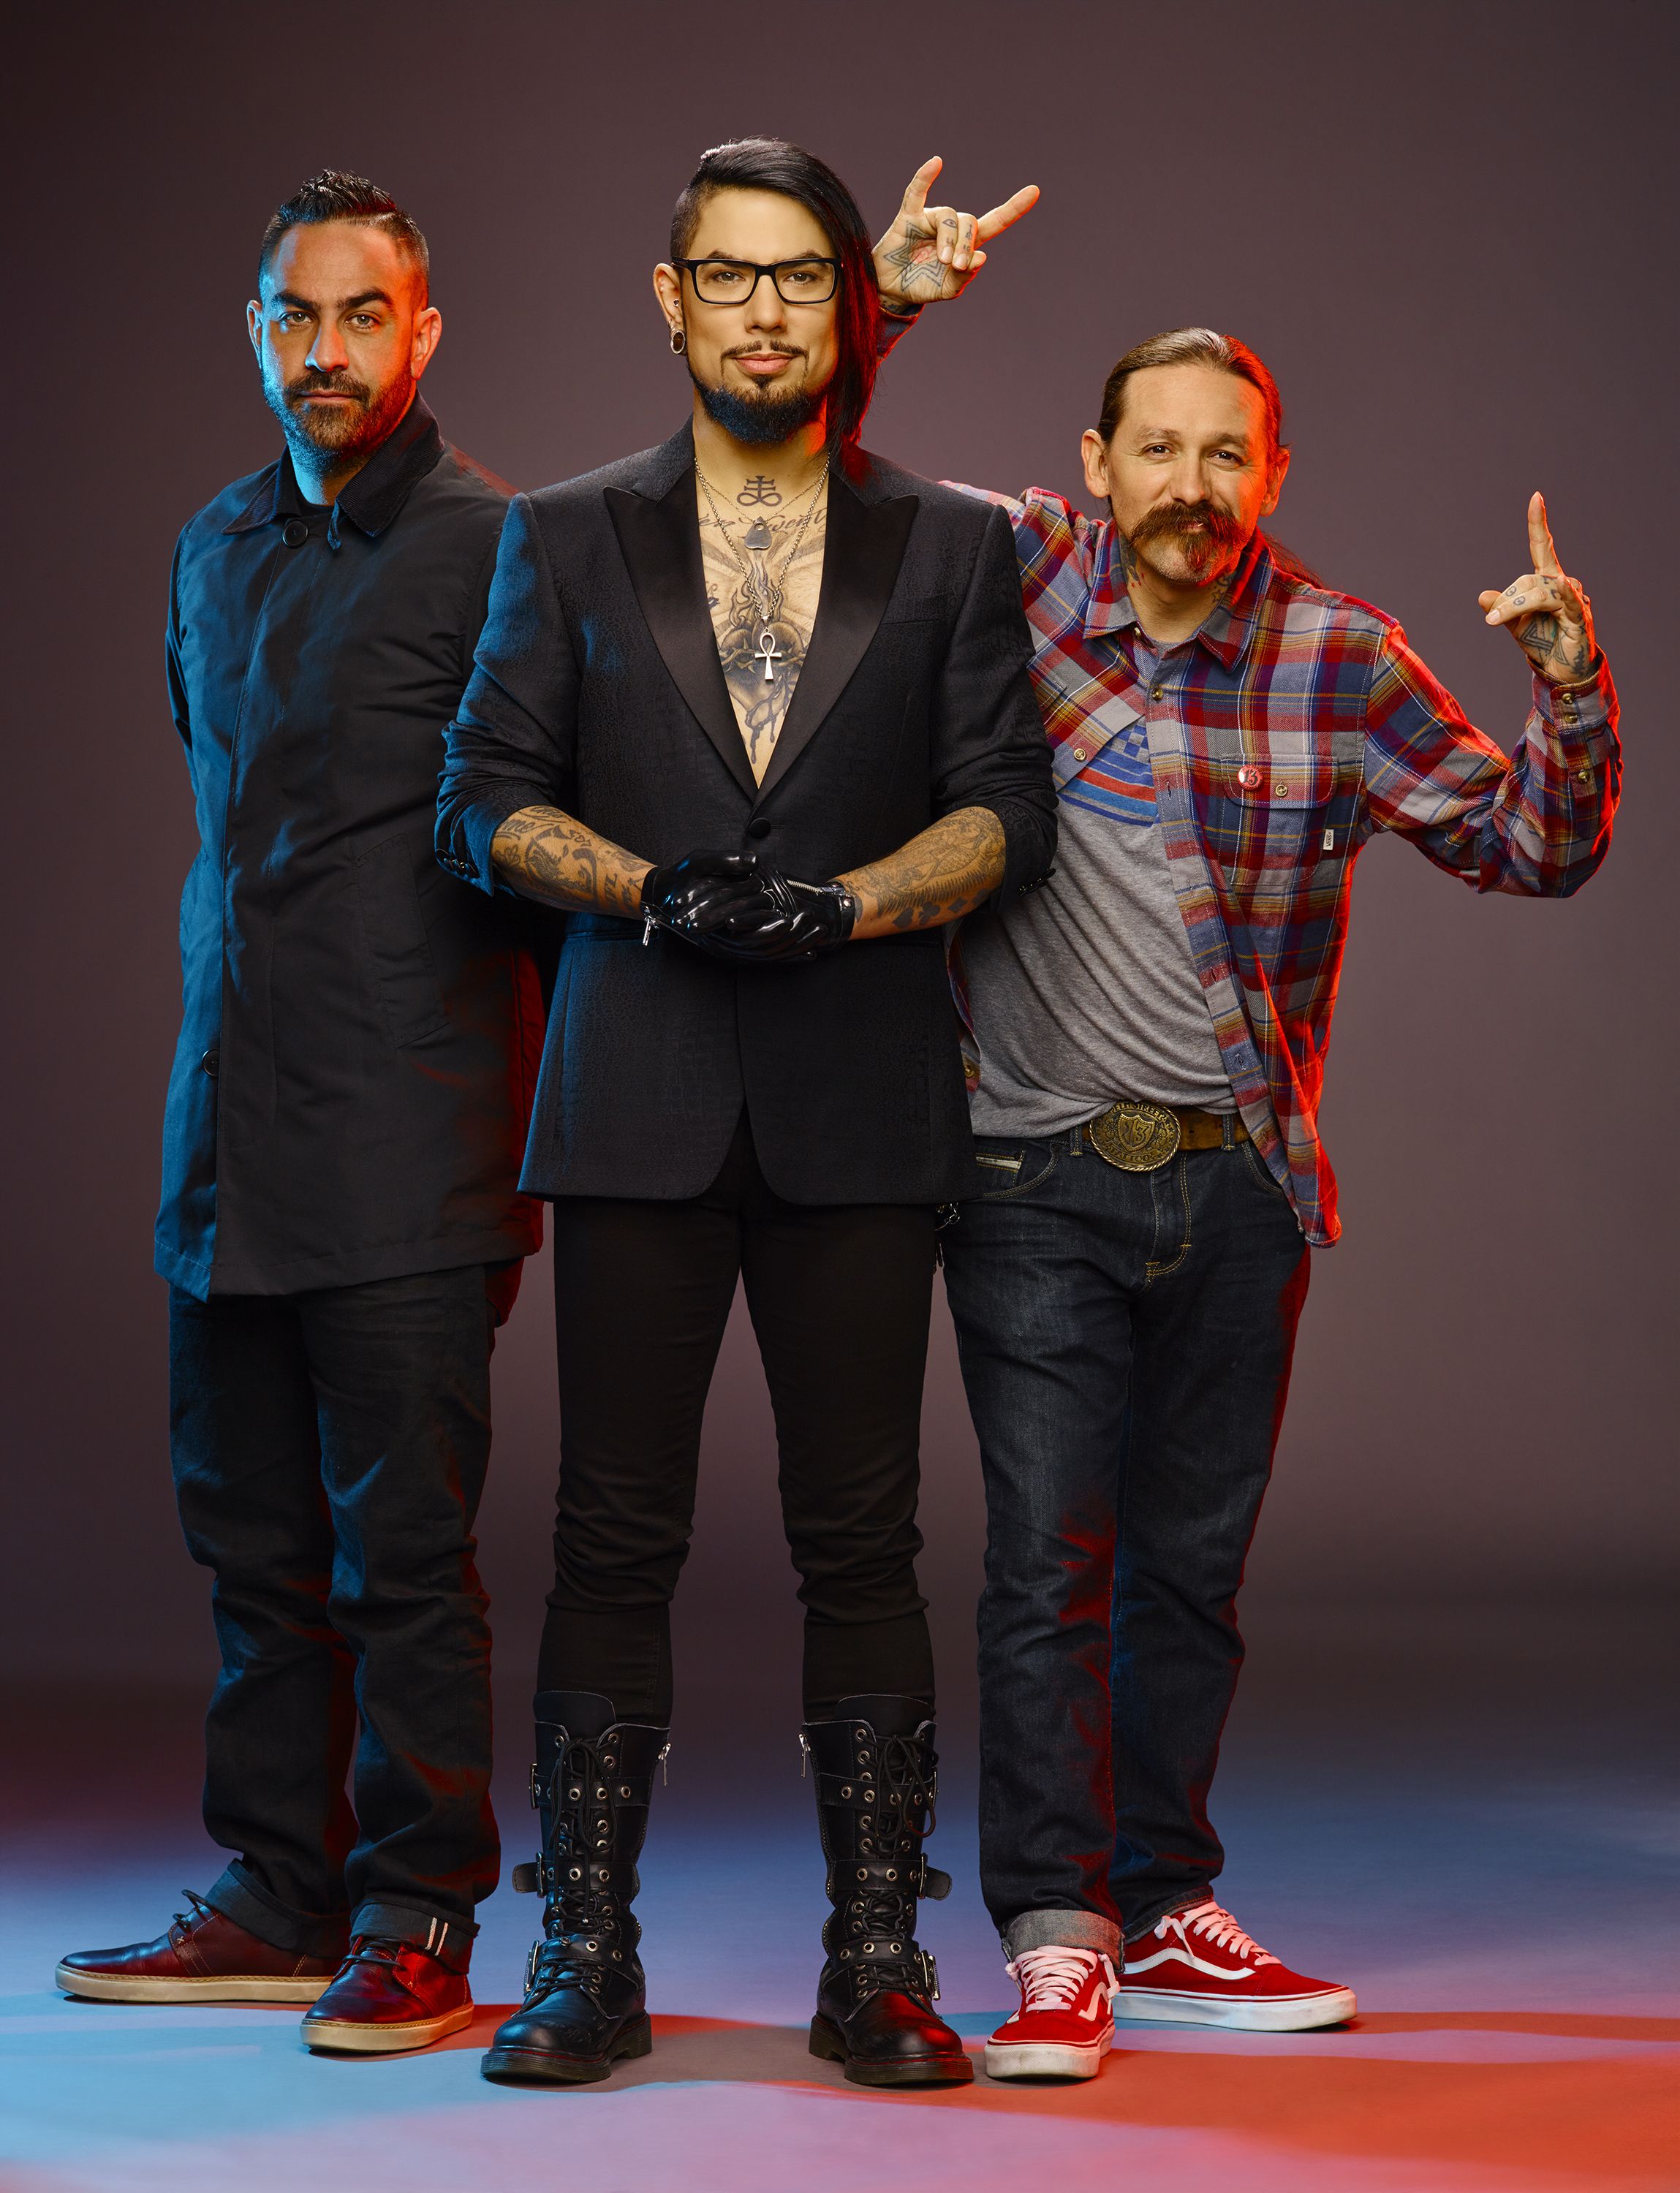 Ink Master' Season 7 Premiere Date Announced; Meet The New Cast